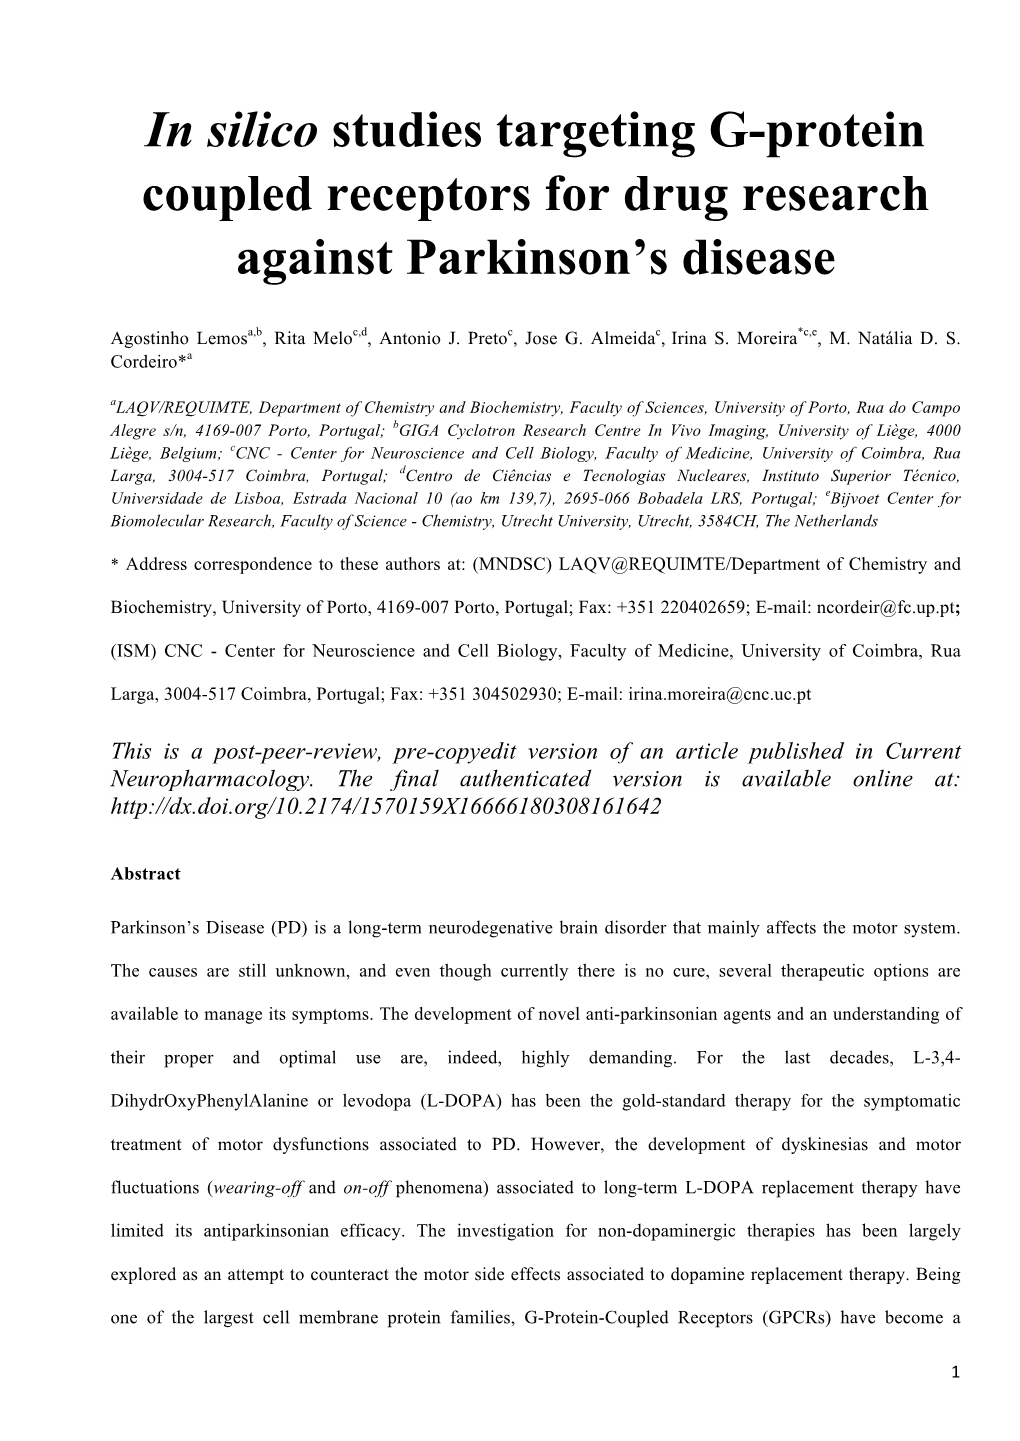 In Silico Studies Targeting G-Protein Coupled Receptors for Drug Research Against Parkinson’S Disease